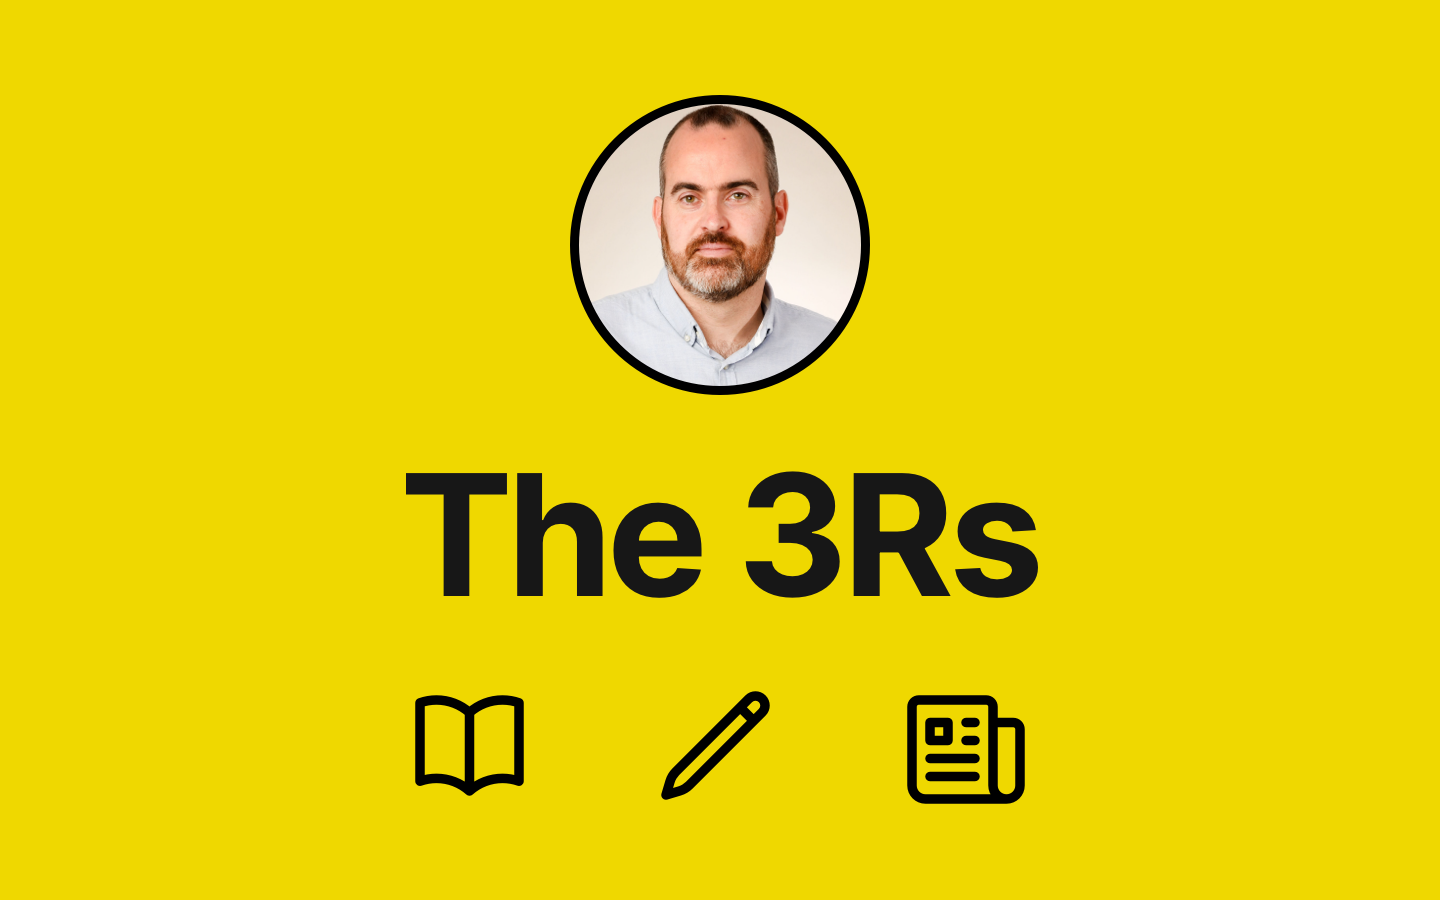 The 3Rs - Reading, w®iting, and research to be interested in #33 feature image